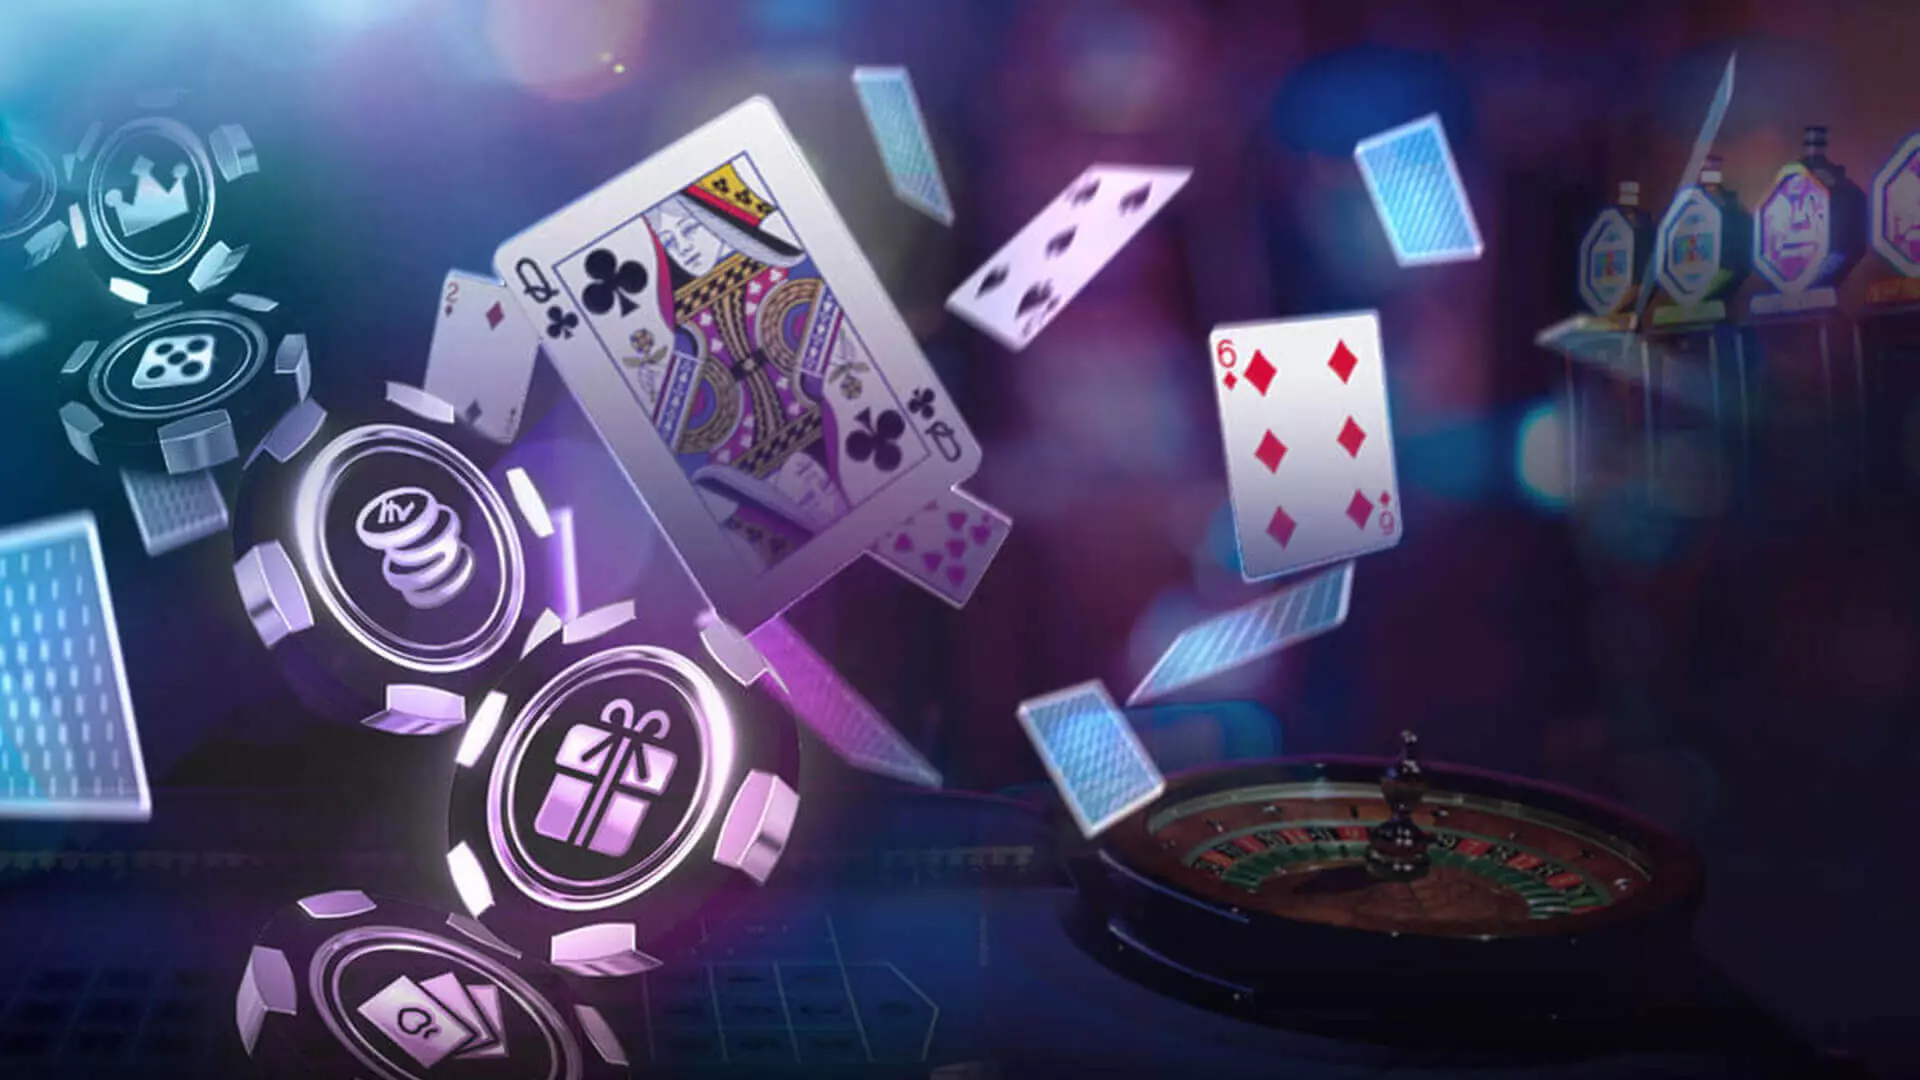 Casino Strategy 2022 - How to Win Big at Casino Online